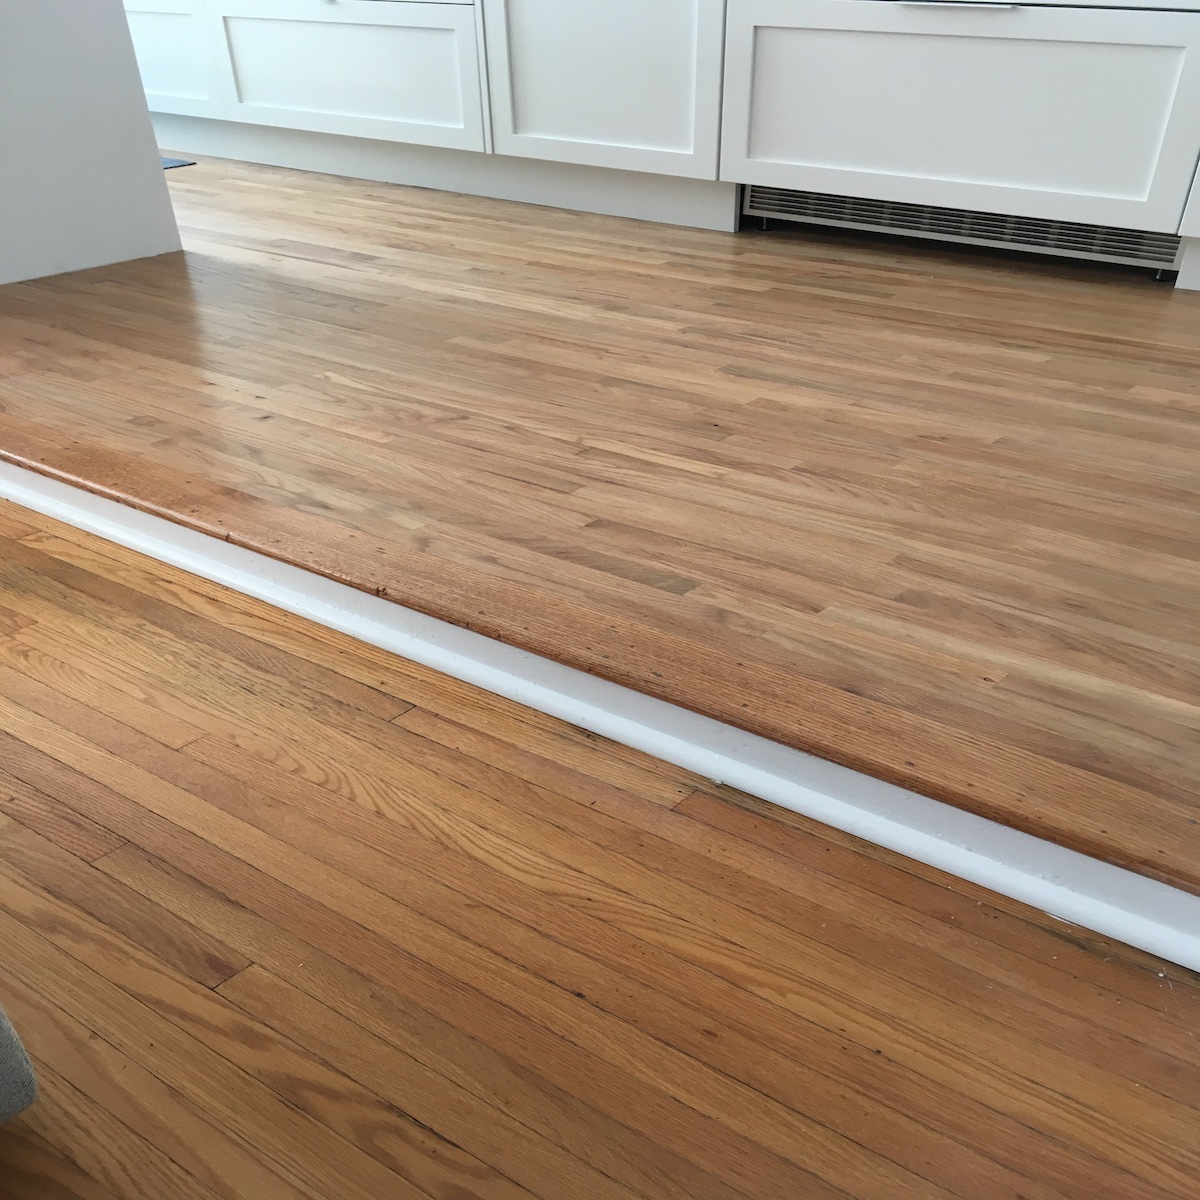 Renov8or Pet Stains On Hardwood Floors Before And After Photos